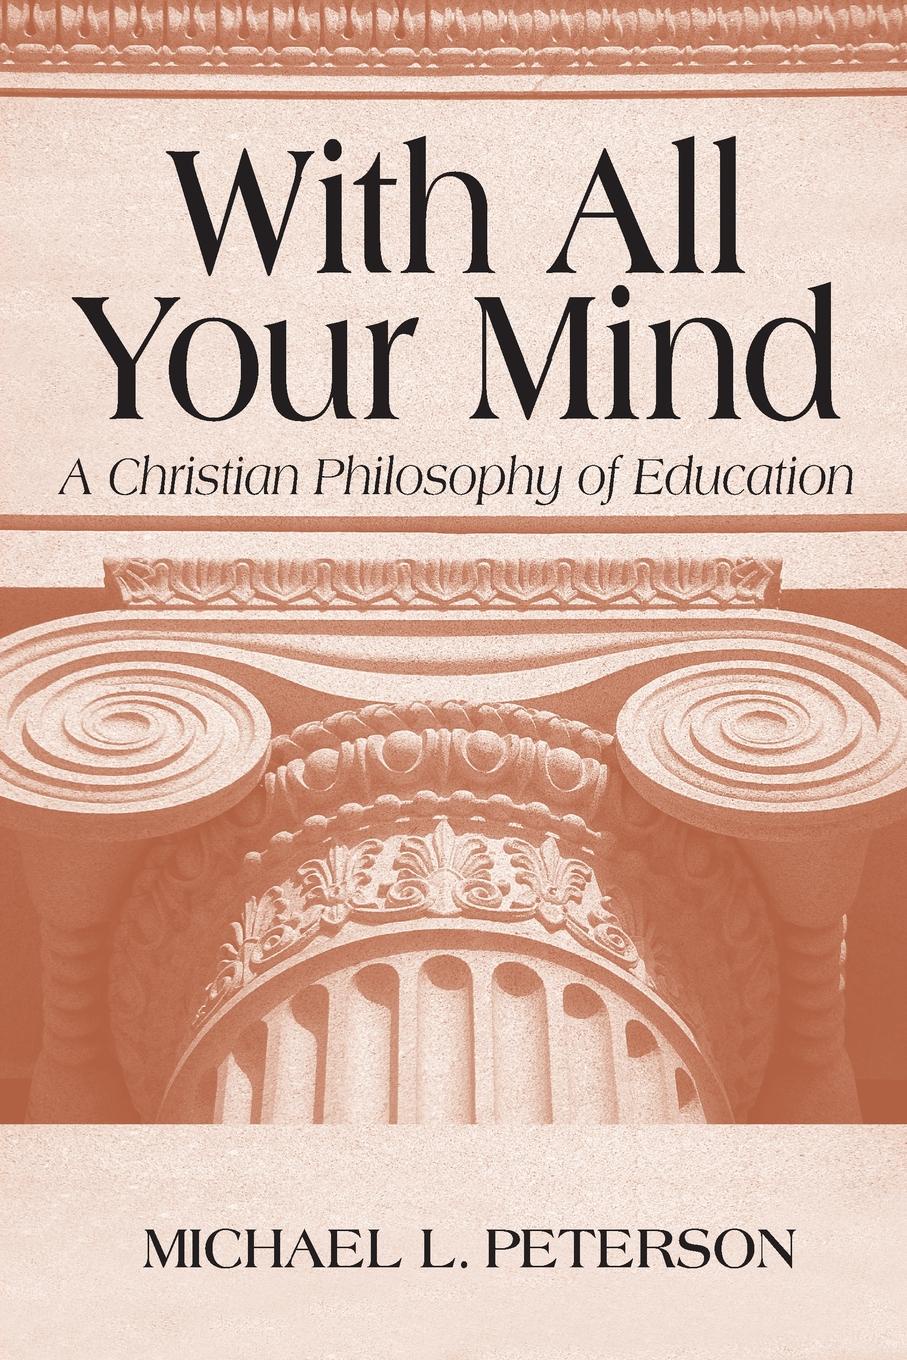 With All Your Mind. A Christian Philosophy of Education